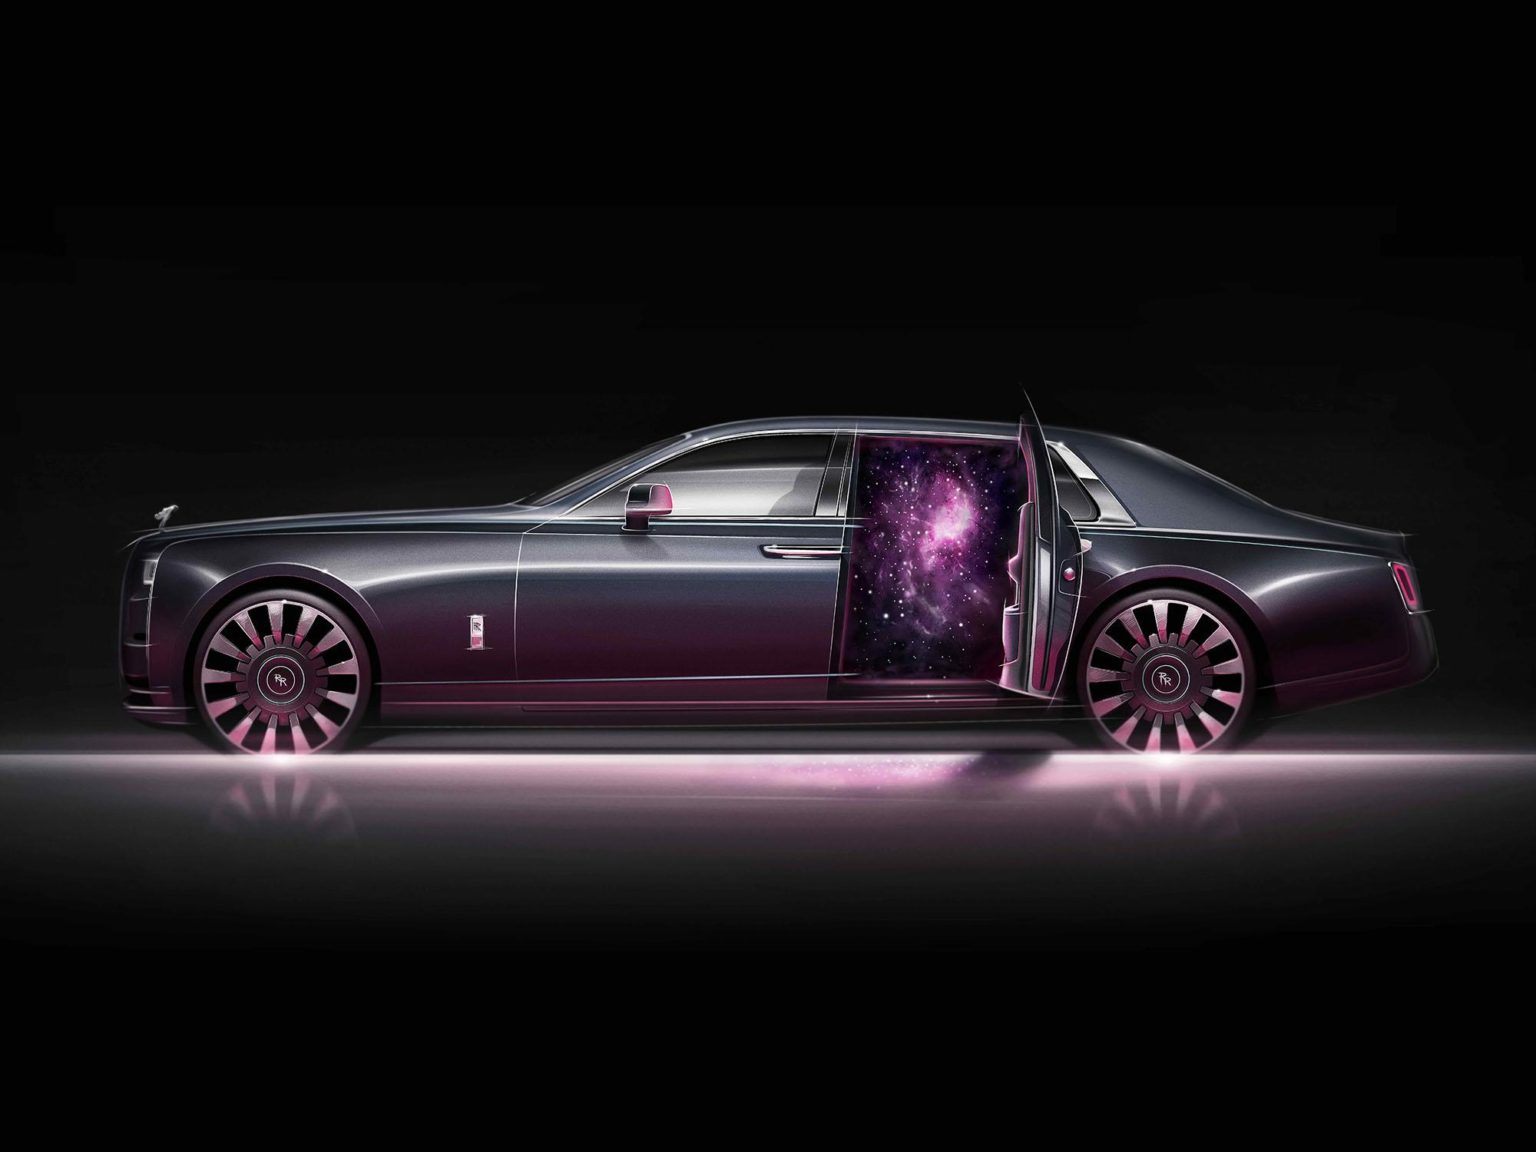 The Rolls-Royce Phantom Tempus Collection takes inspiration from the stars.